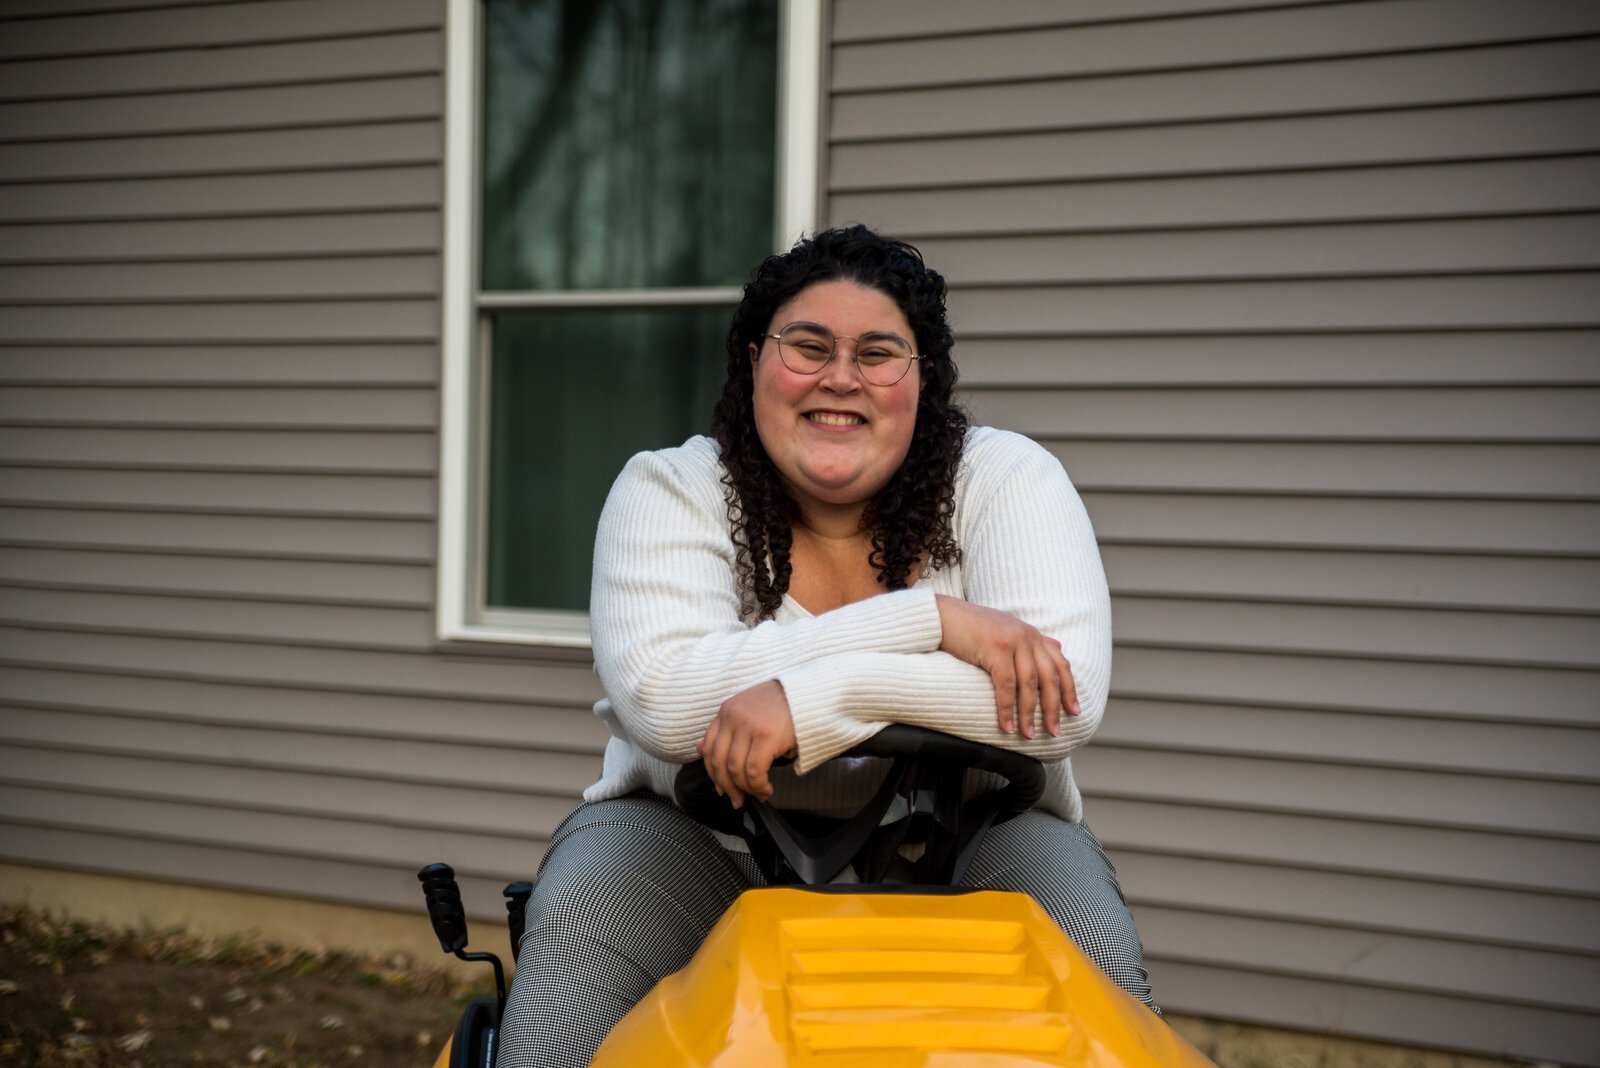 Blaise Boulding is excited to have a big backyard to mow. She has plans for the yard: "I want to have a garden, and I want to have chickens." 